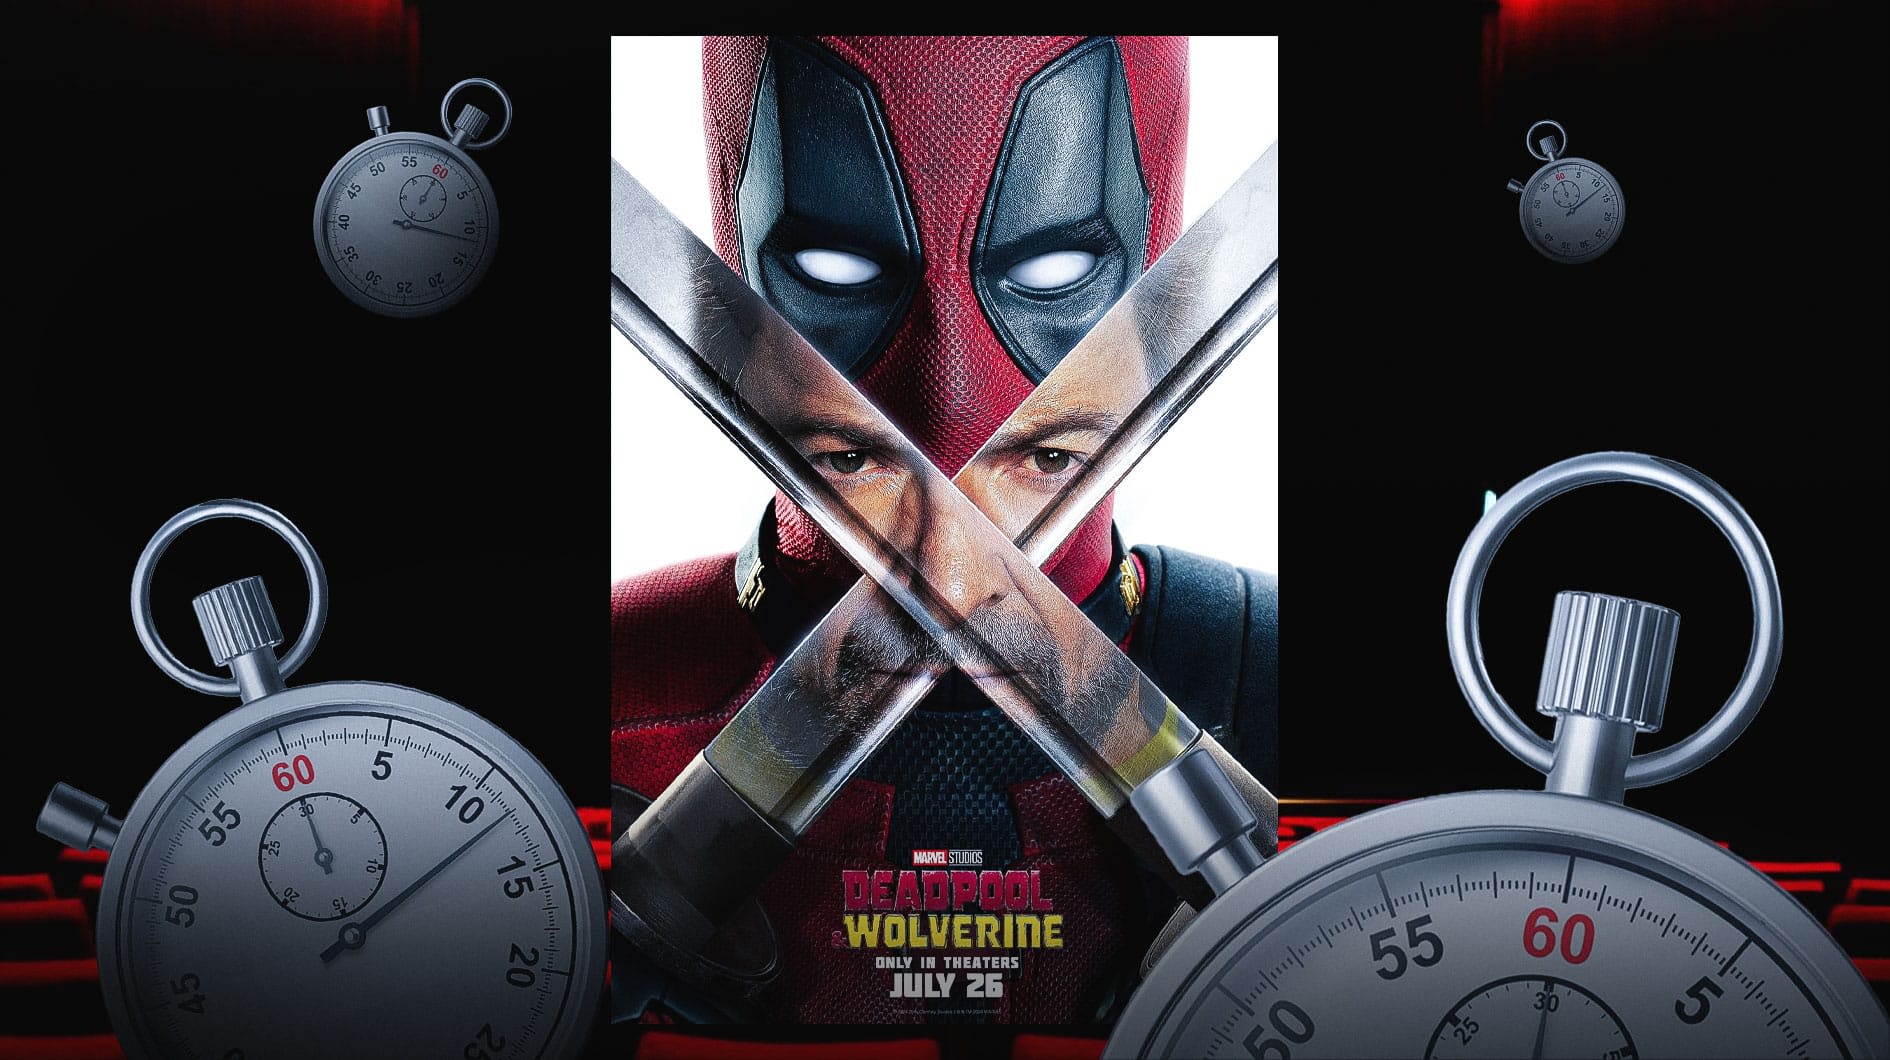 Deadpool and Wolverine's rumored runtime breaks franchise record